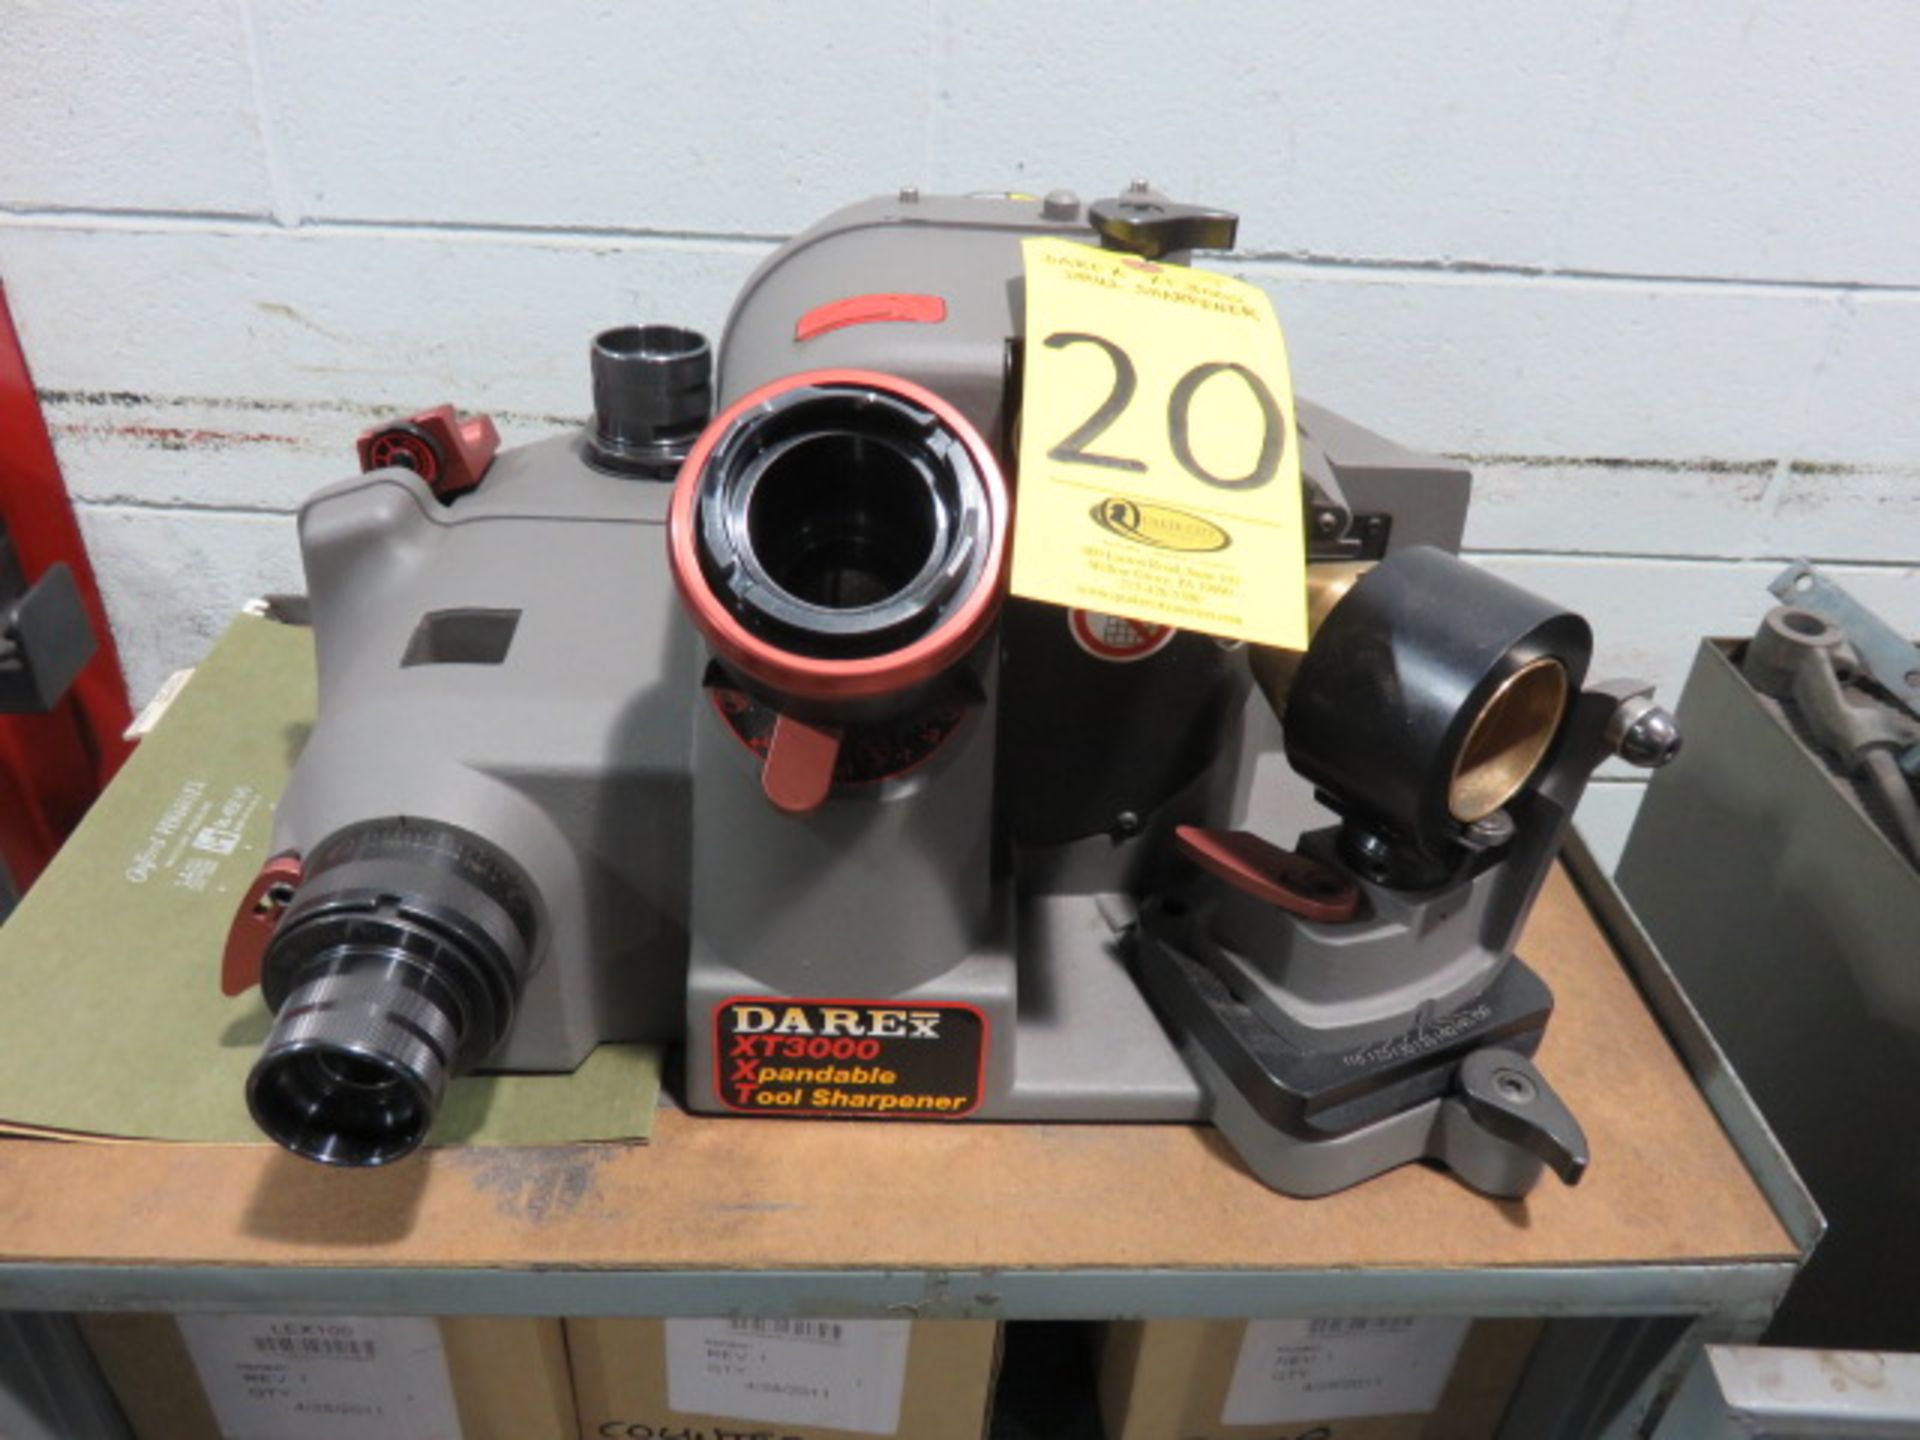 2011 DAREX XT 3000 EXPANDABLE TOOL SHARPENER, S/N 12007606, LEX150 COUNTERSINK, LEX100 X-Y TABLE - Image 7 of 7